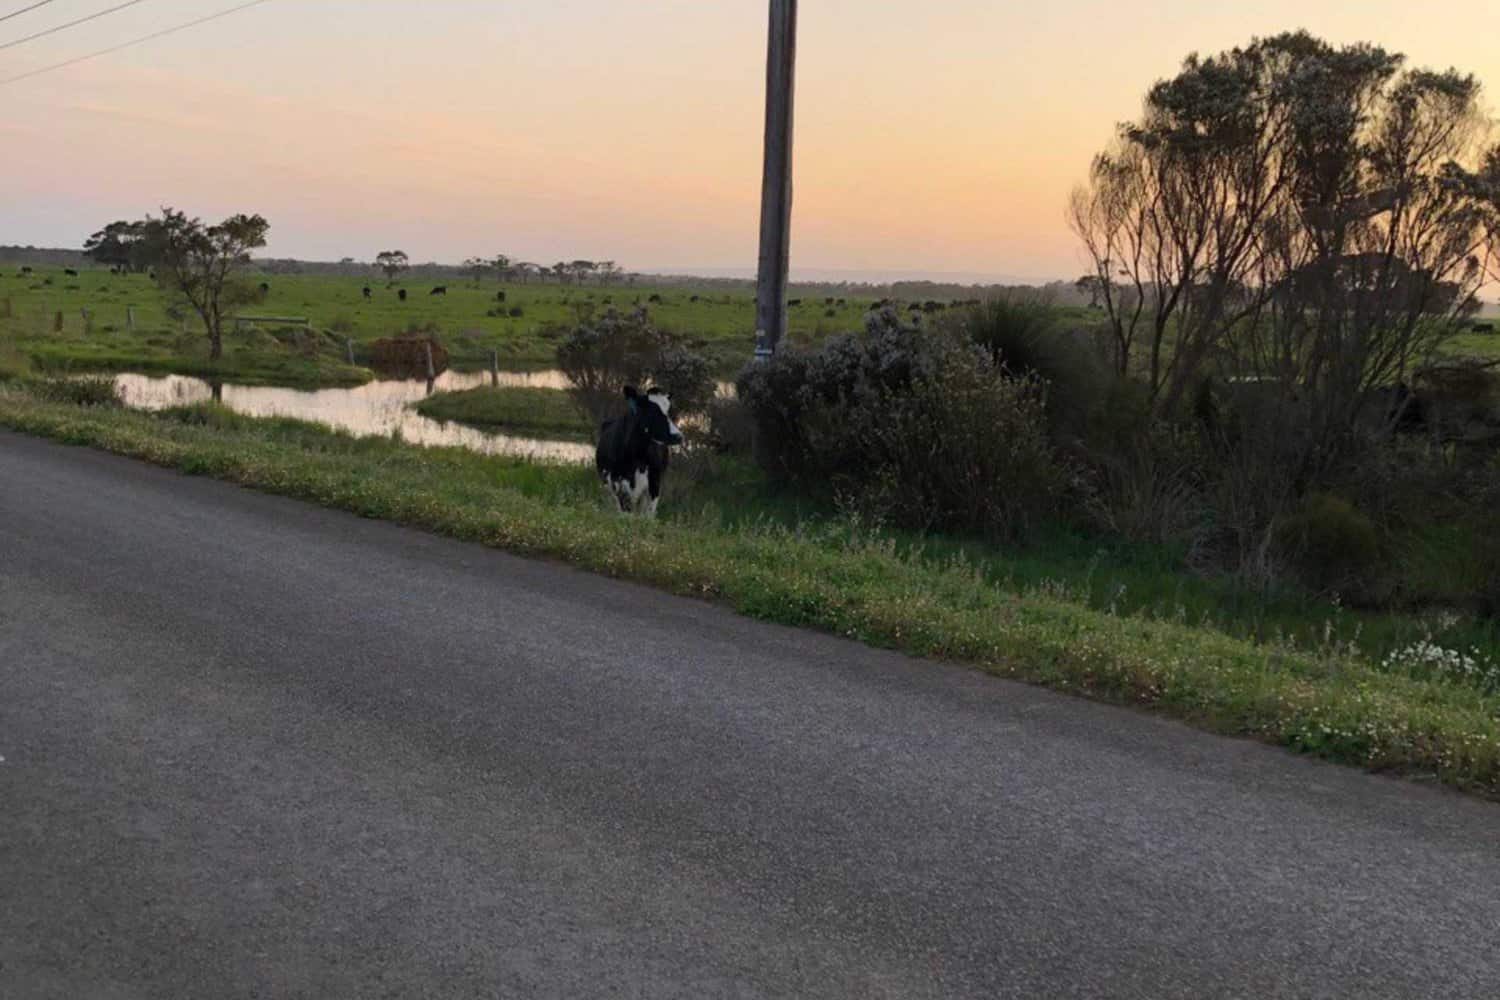 A cow stands by the roadside at dusk in Margaret River with a waterlogged field in the background, highlighting the agricultural aspect of the region against a sunset-painted sky.